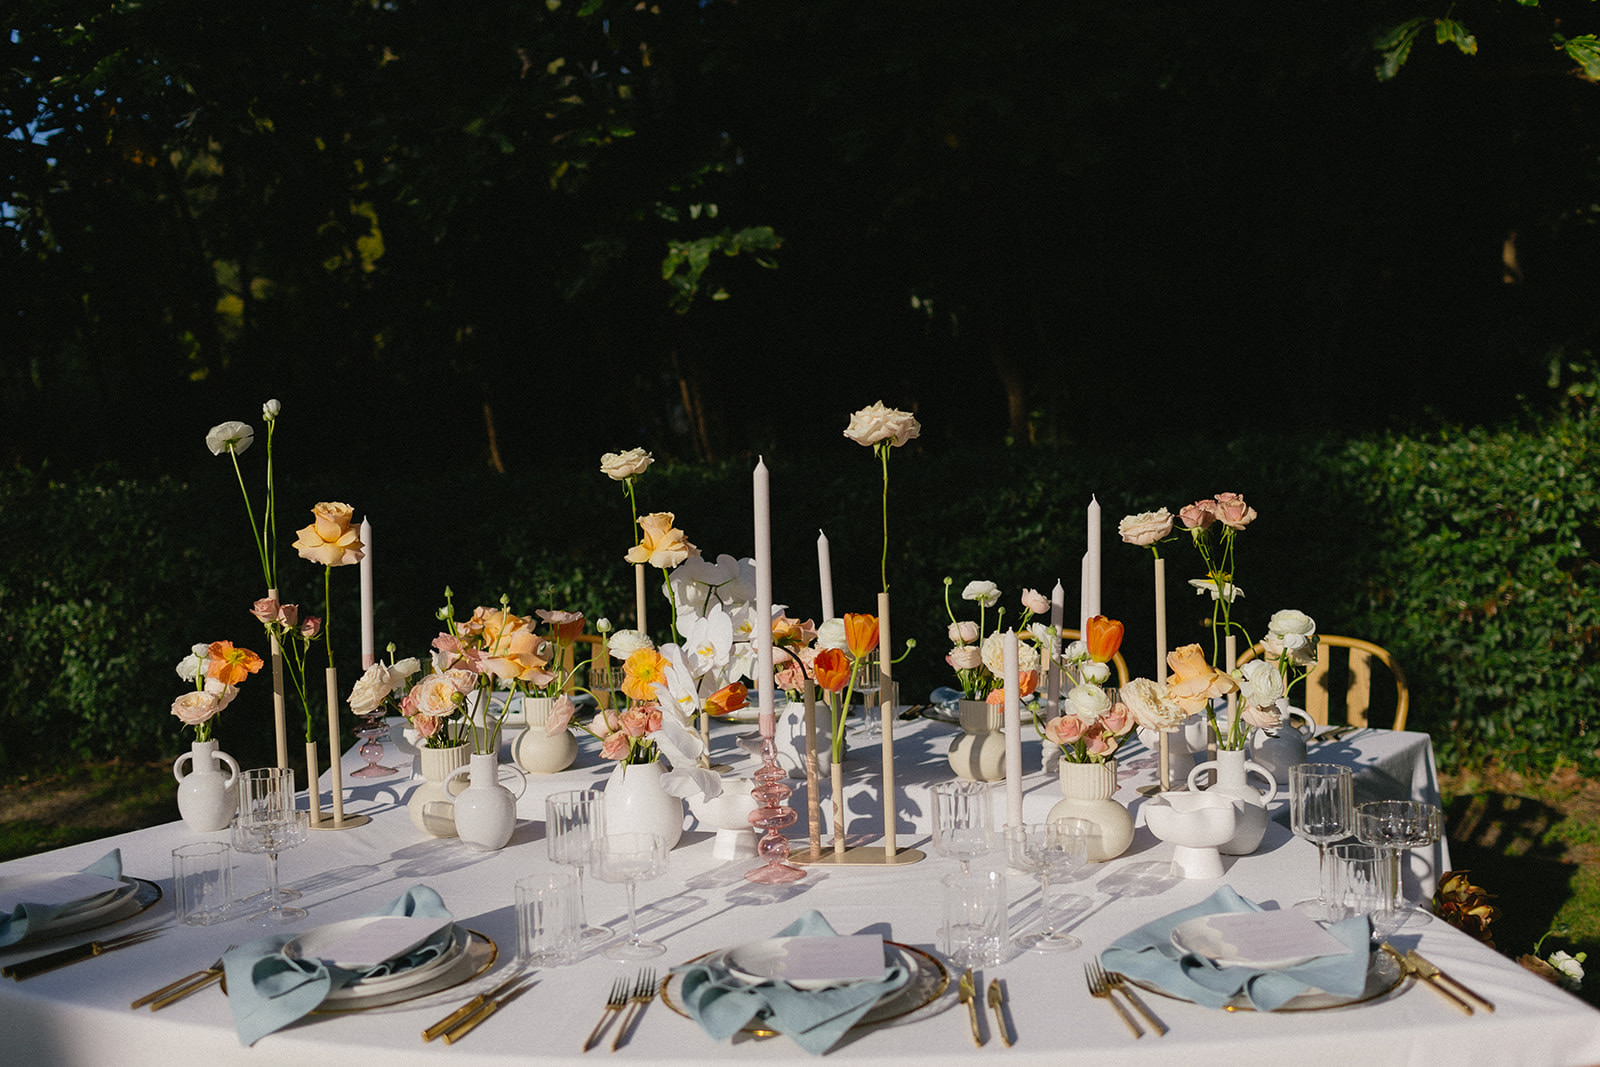 An intimate spring garden wedding with delicate florals and pastels with whimsical light